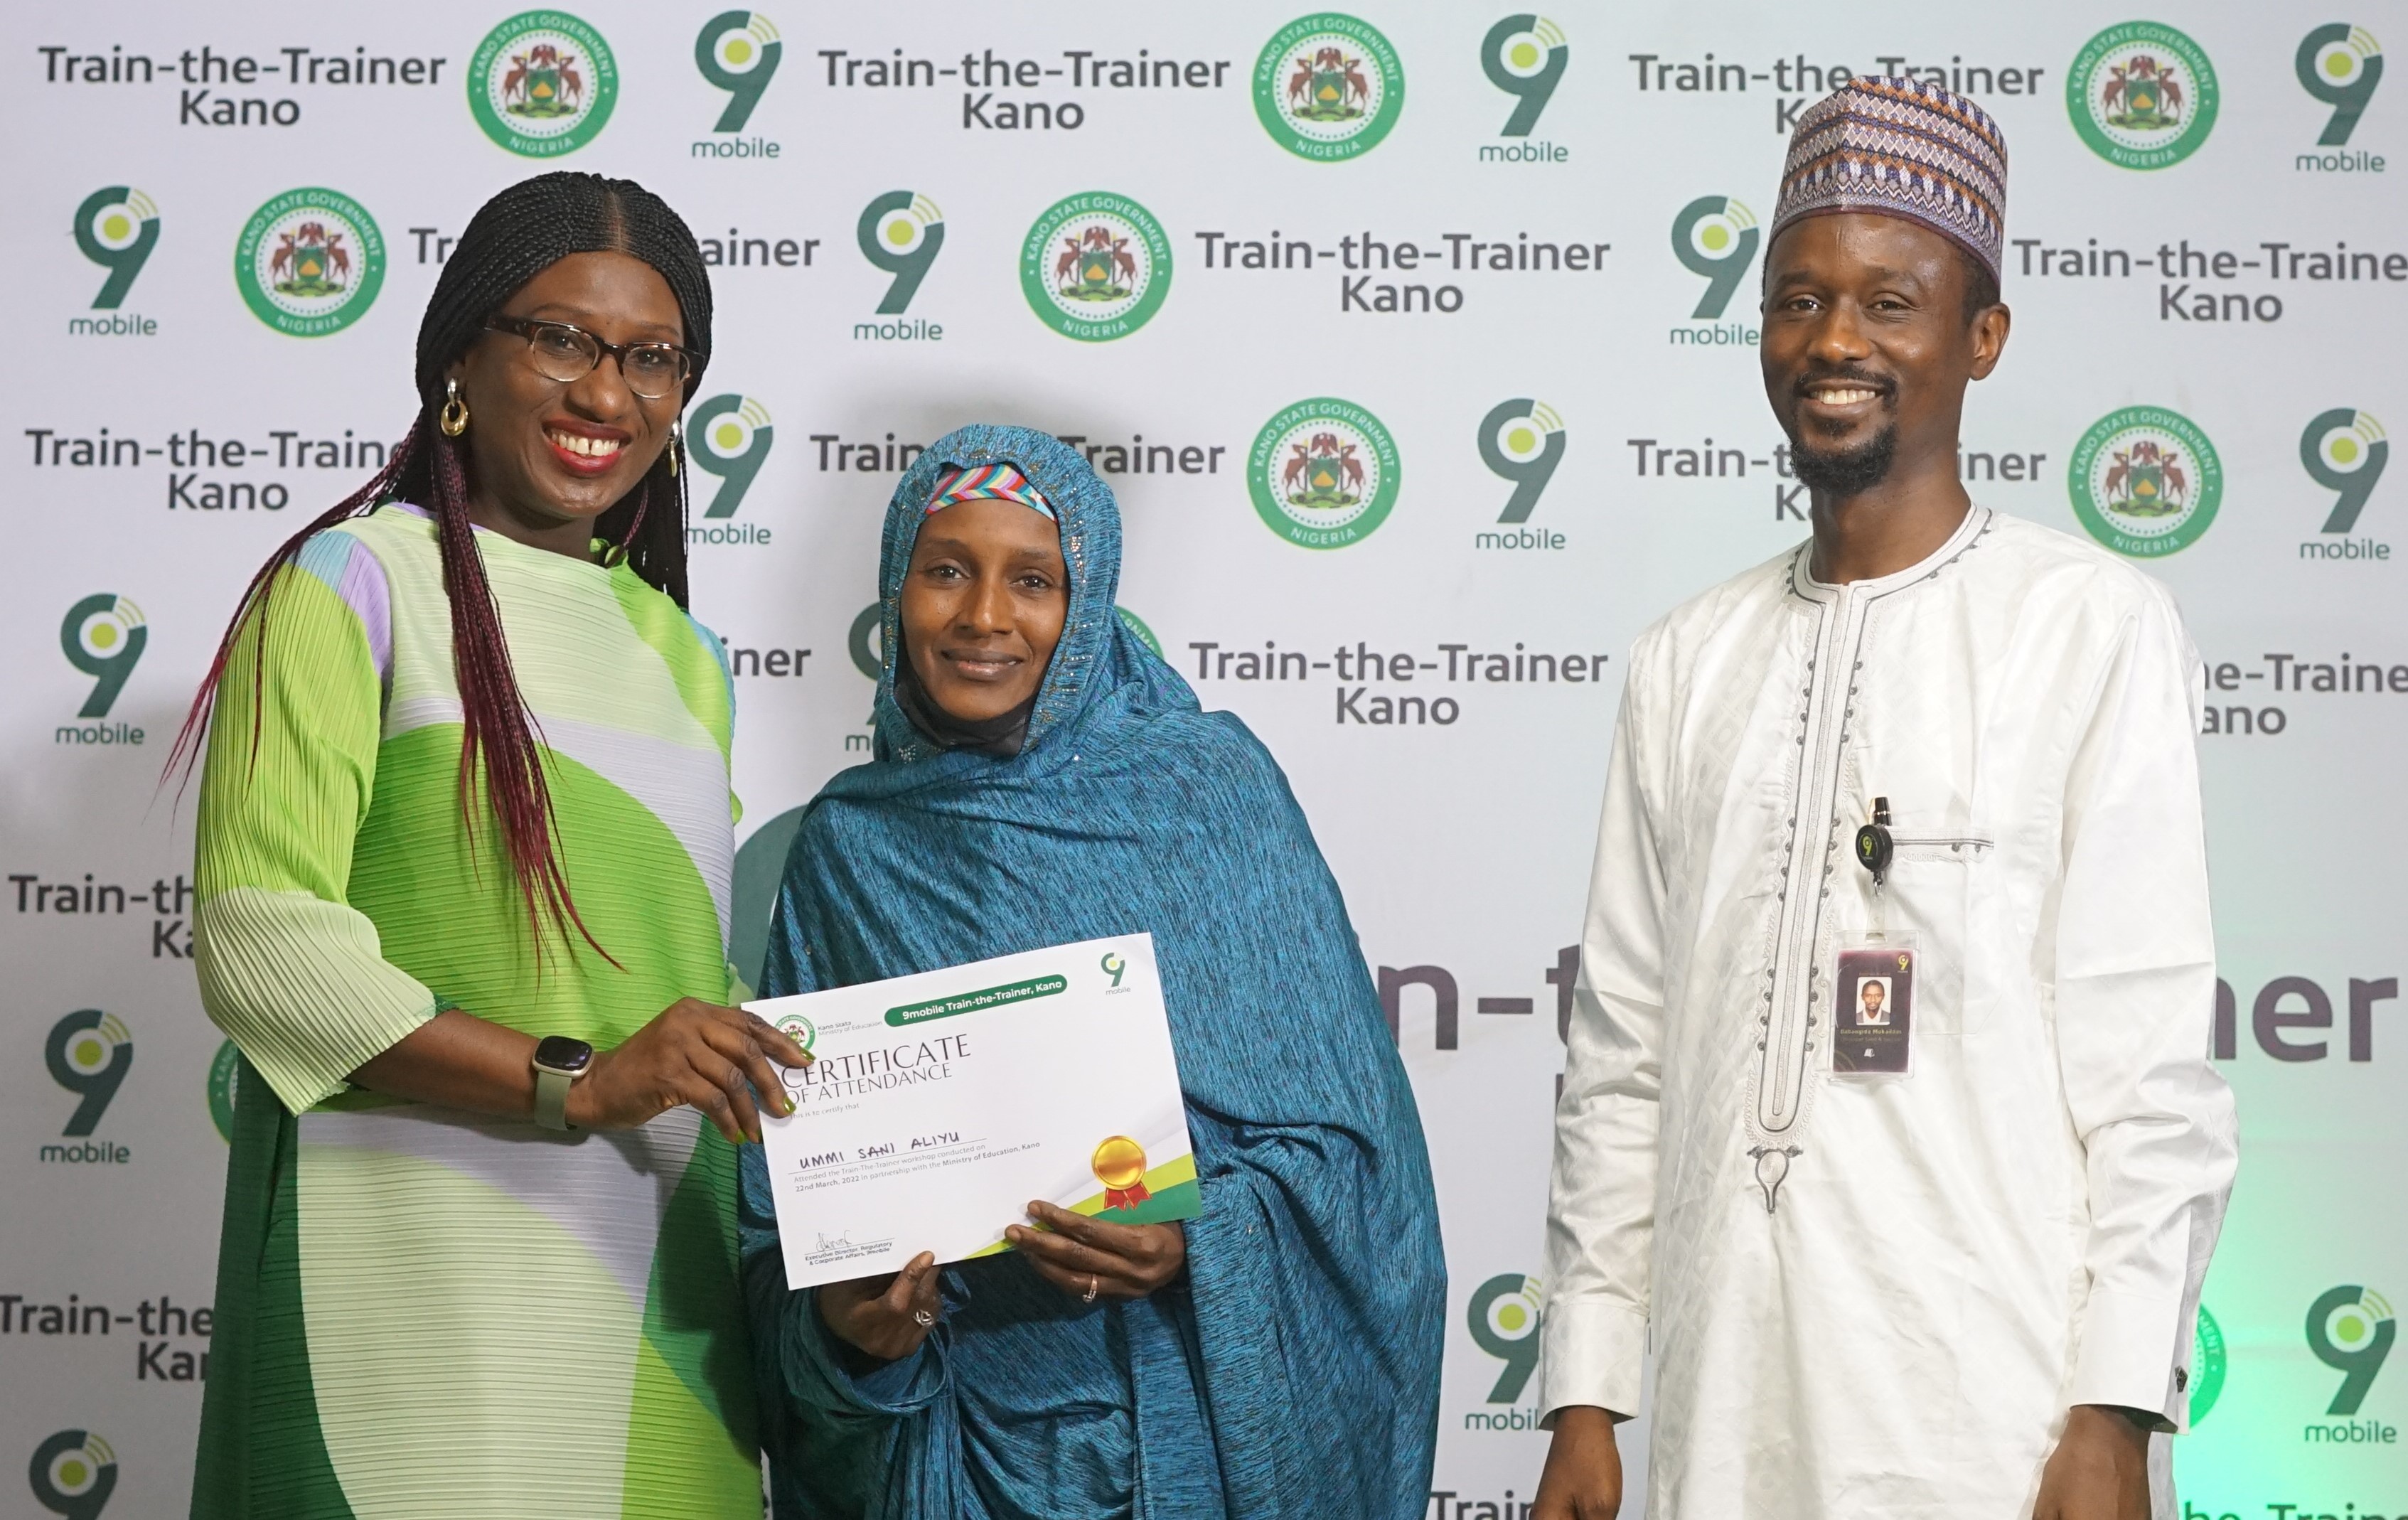 9mobile equips 100 teachers in Kano with innovative teaching skills